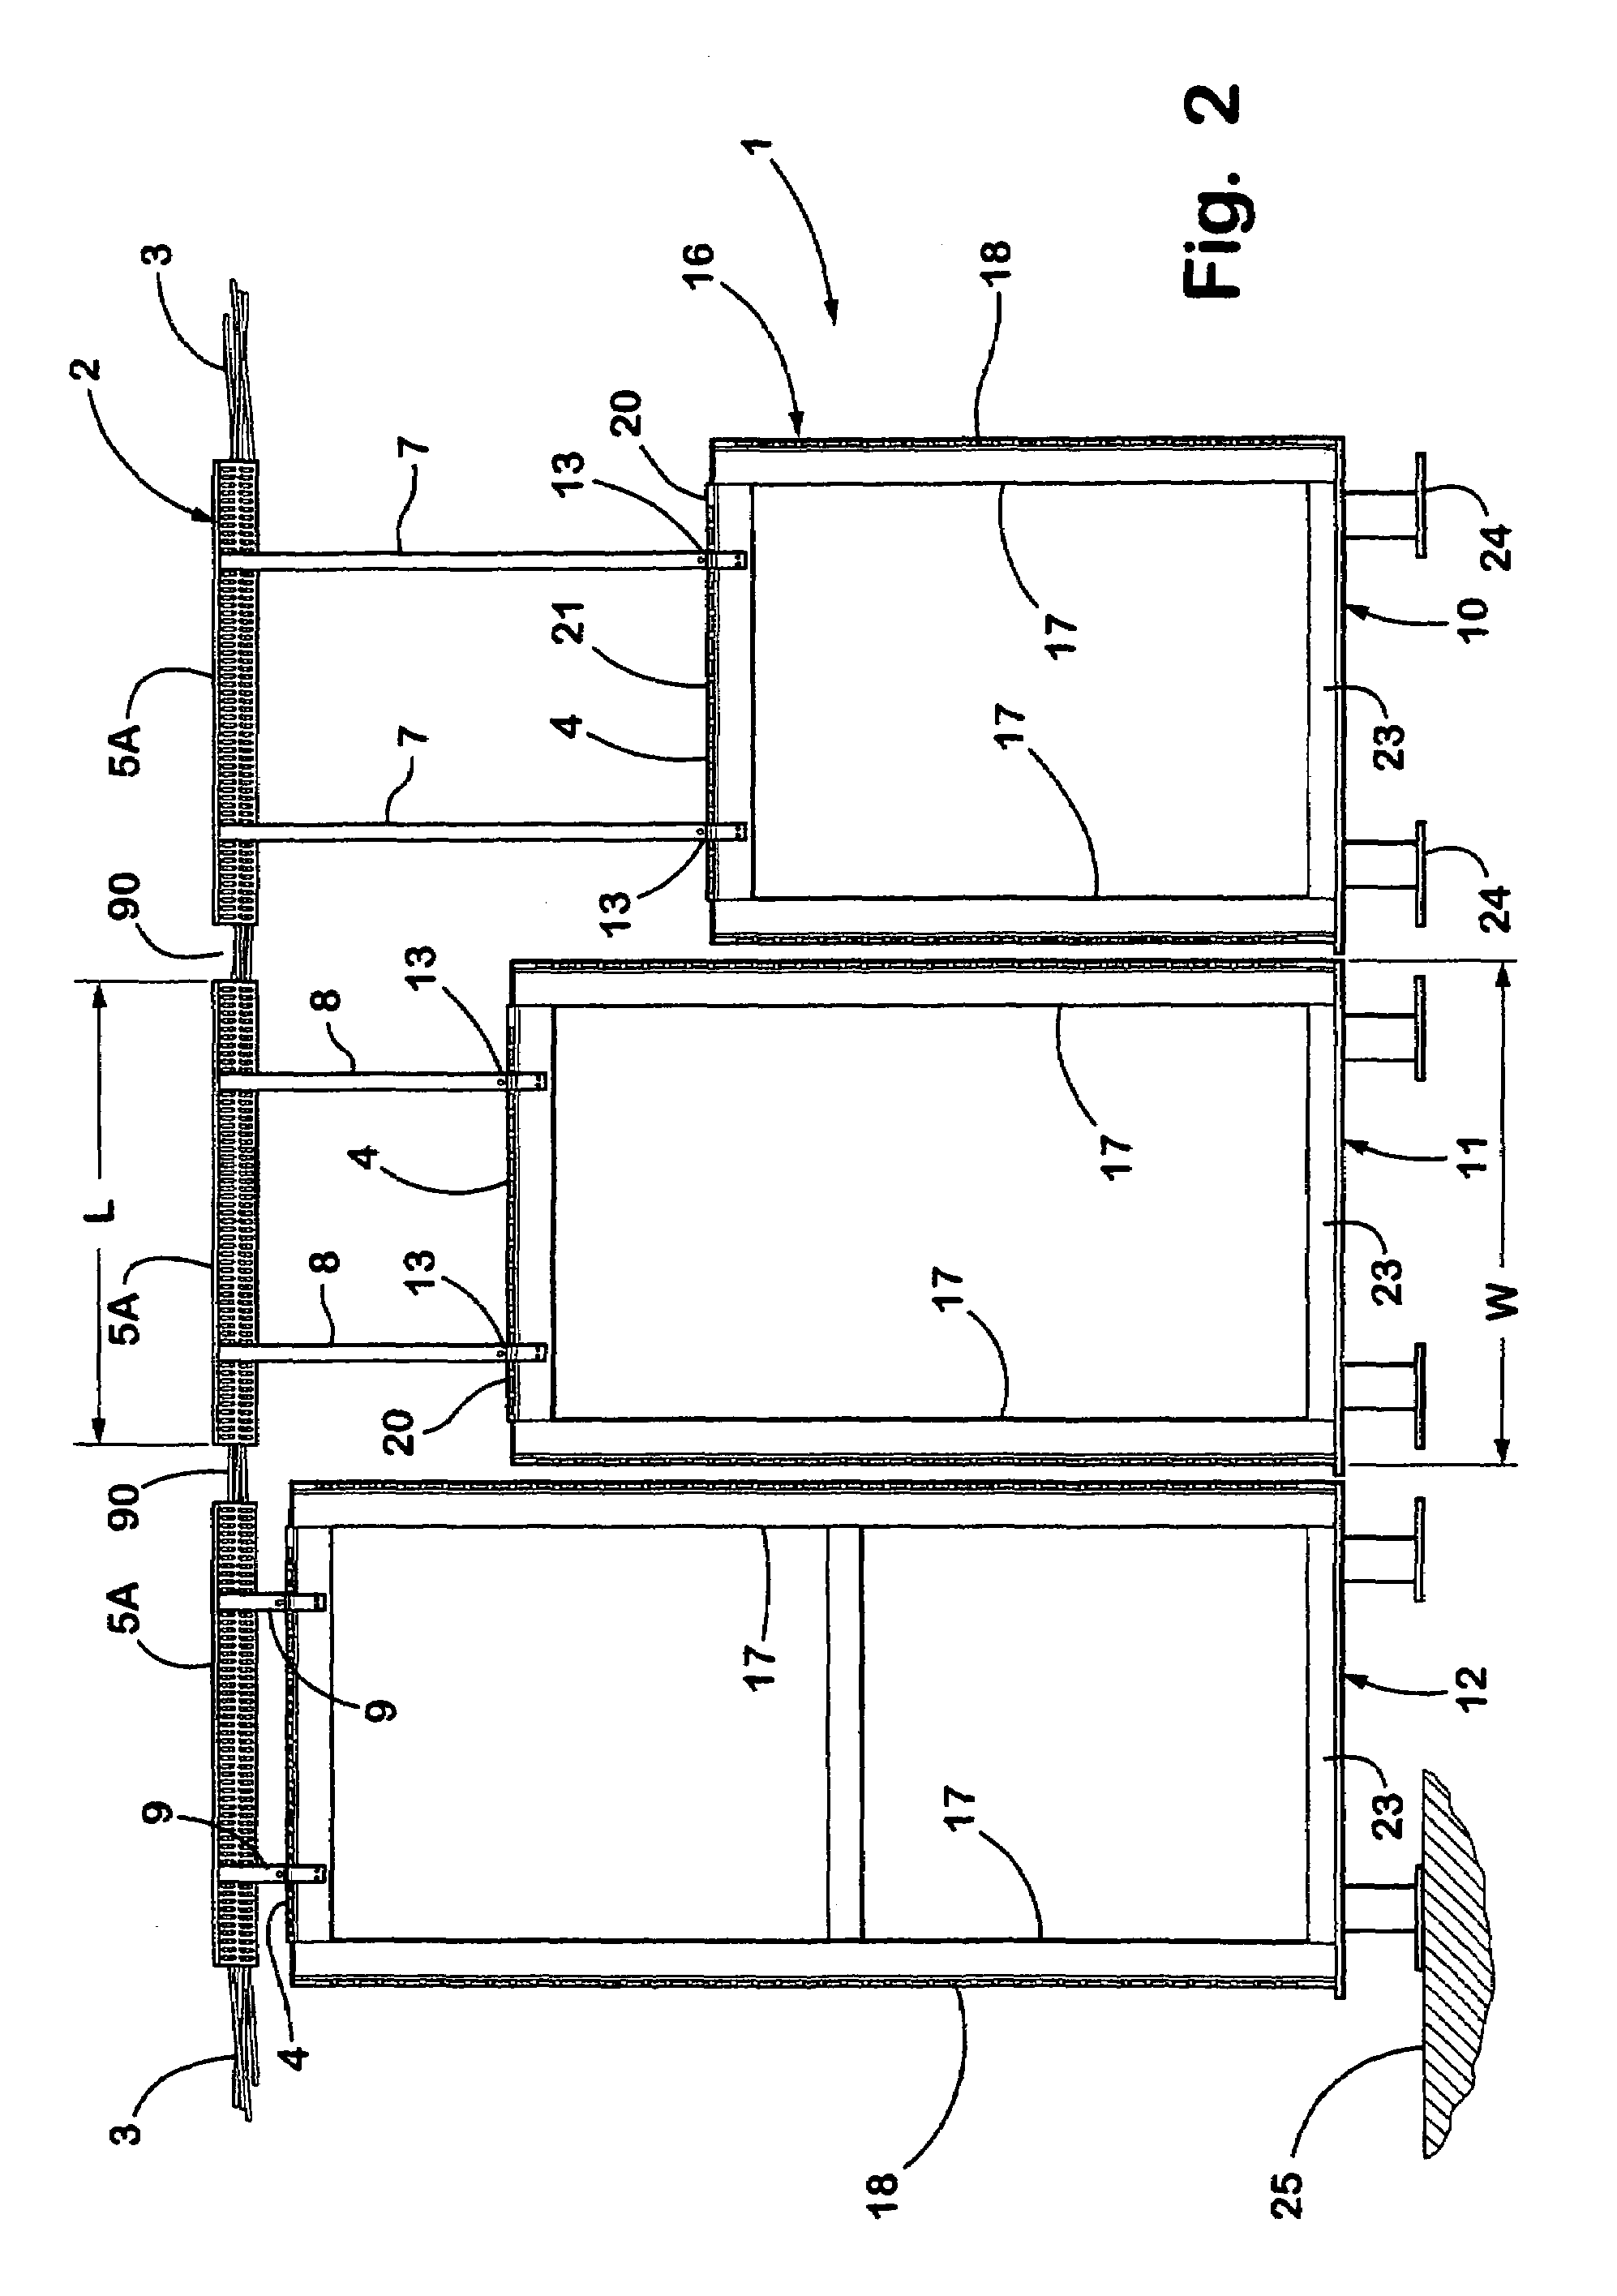 Partition system with elevated raceway